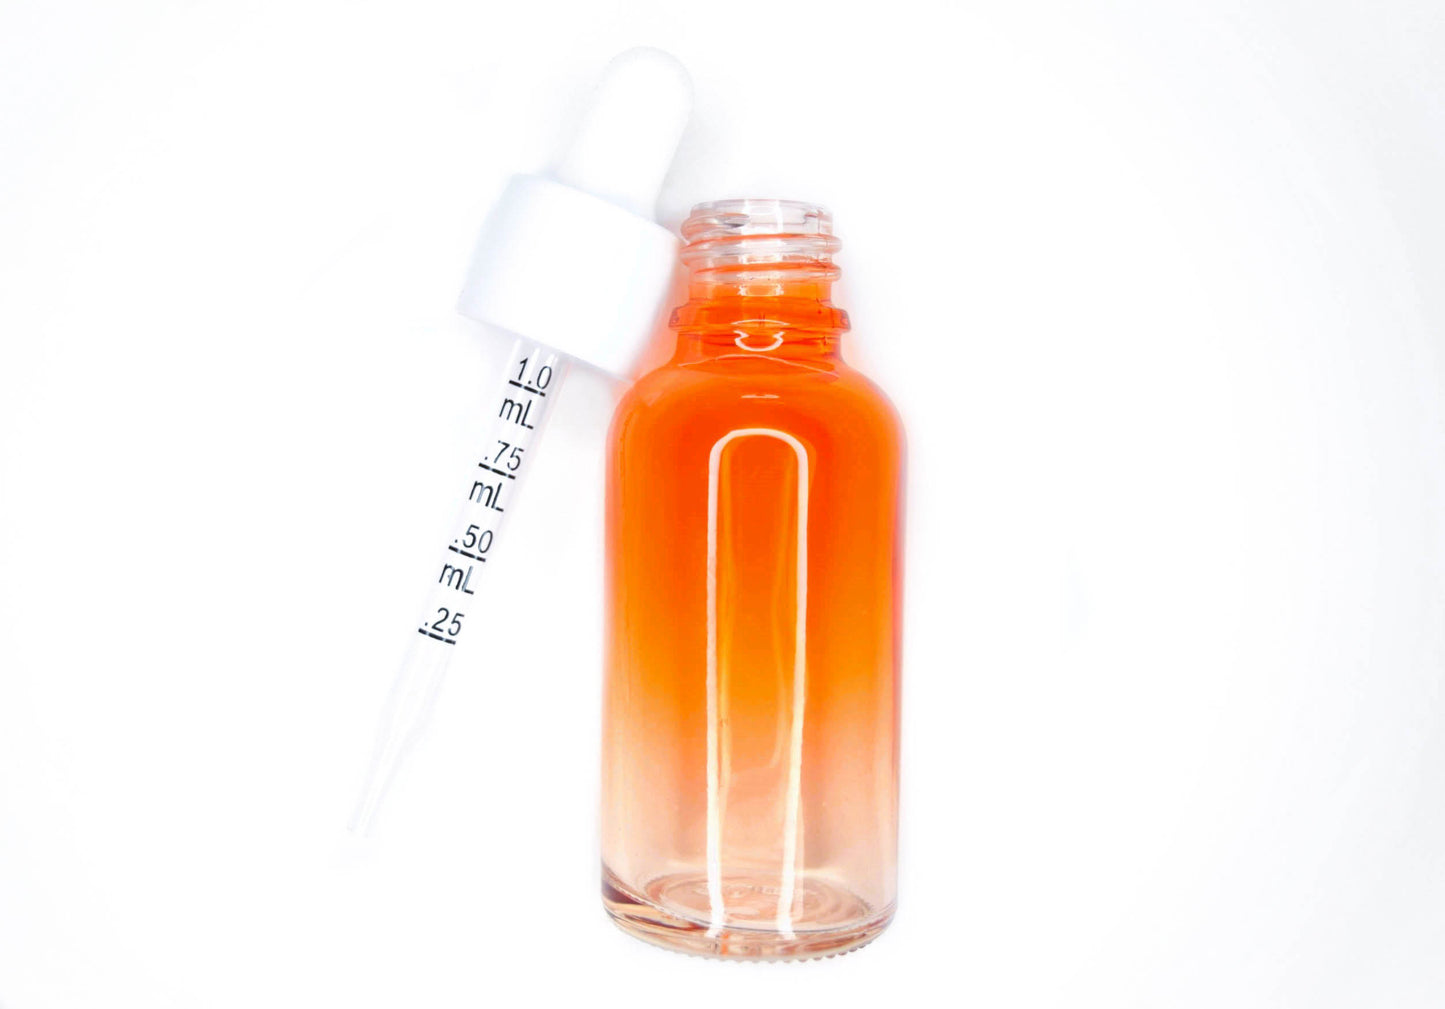 An orange bottle of a clear liquid used to break down the glue used to apply press on nails. A natural compound, 100% vegan, anti-fungal, orange scented remover.